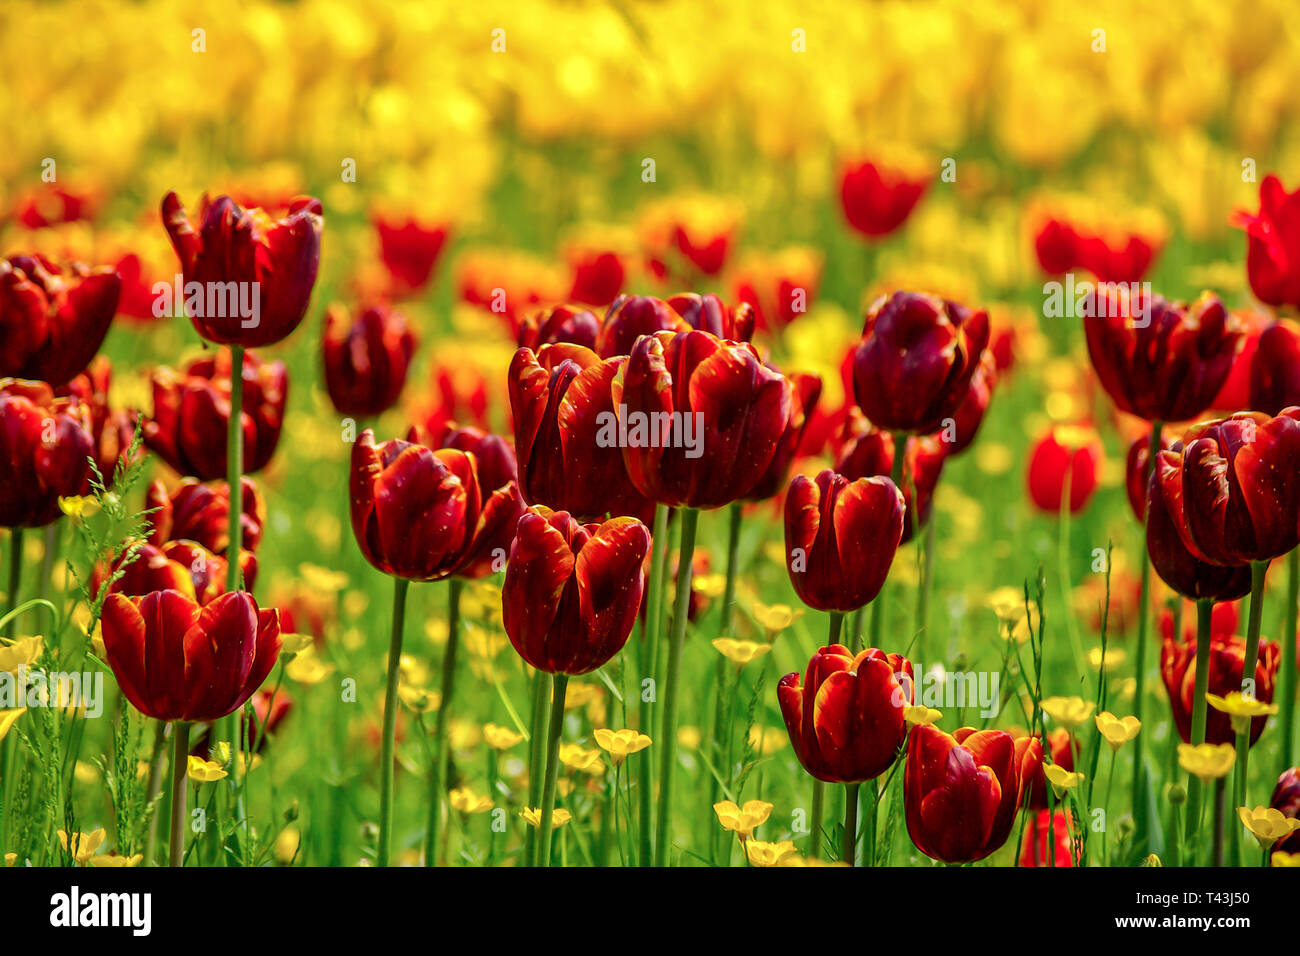 A field of dark red tulips. Stock Photo